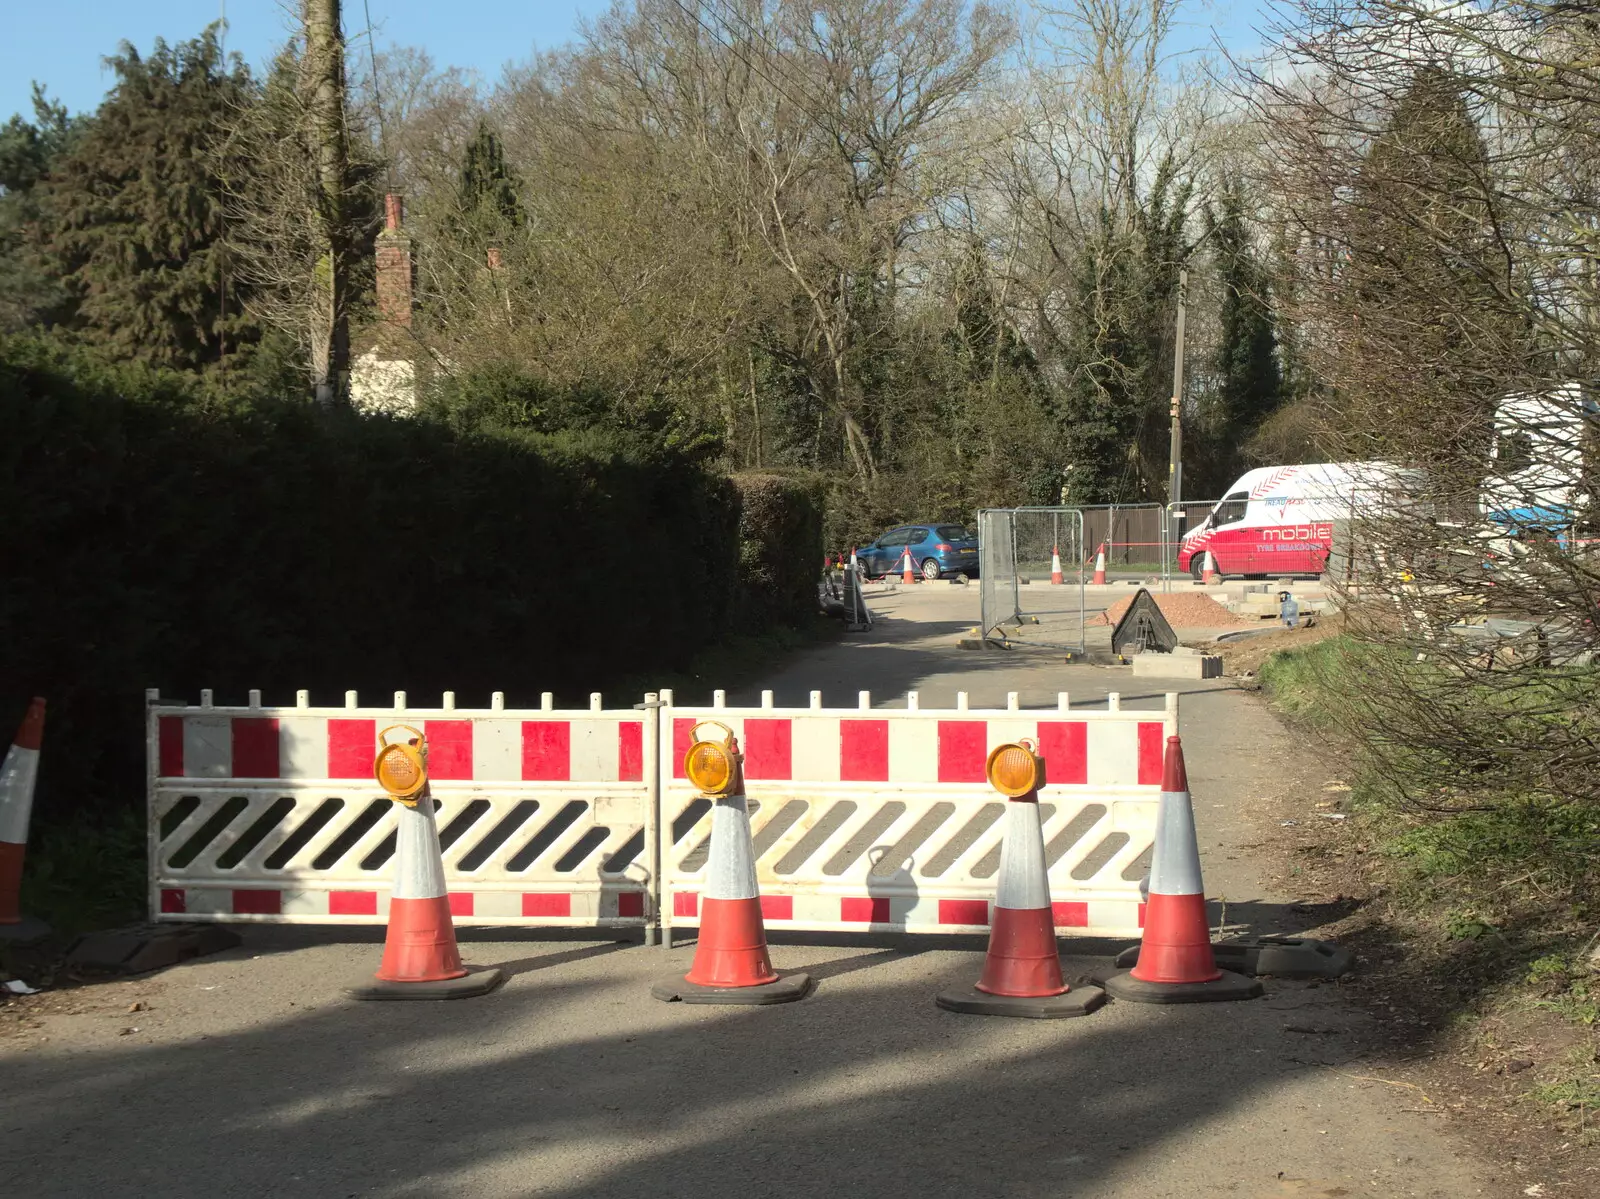 The Brome Triangle section is closed permanently, from Roadworks and Harry's Trampoline, Brome, Suffolk - 6th April 2021